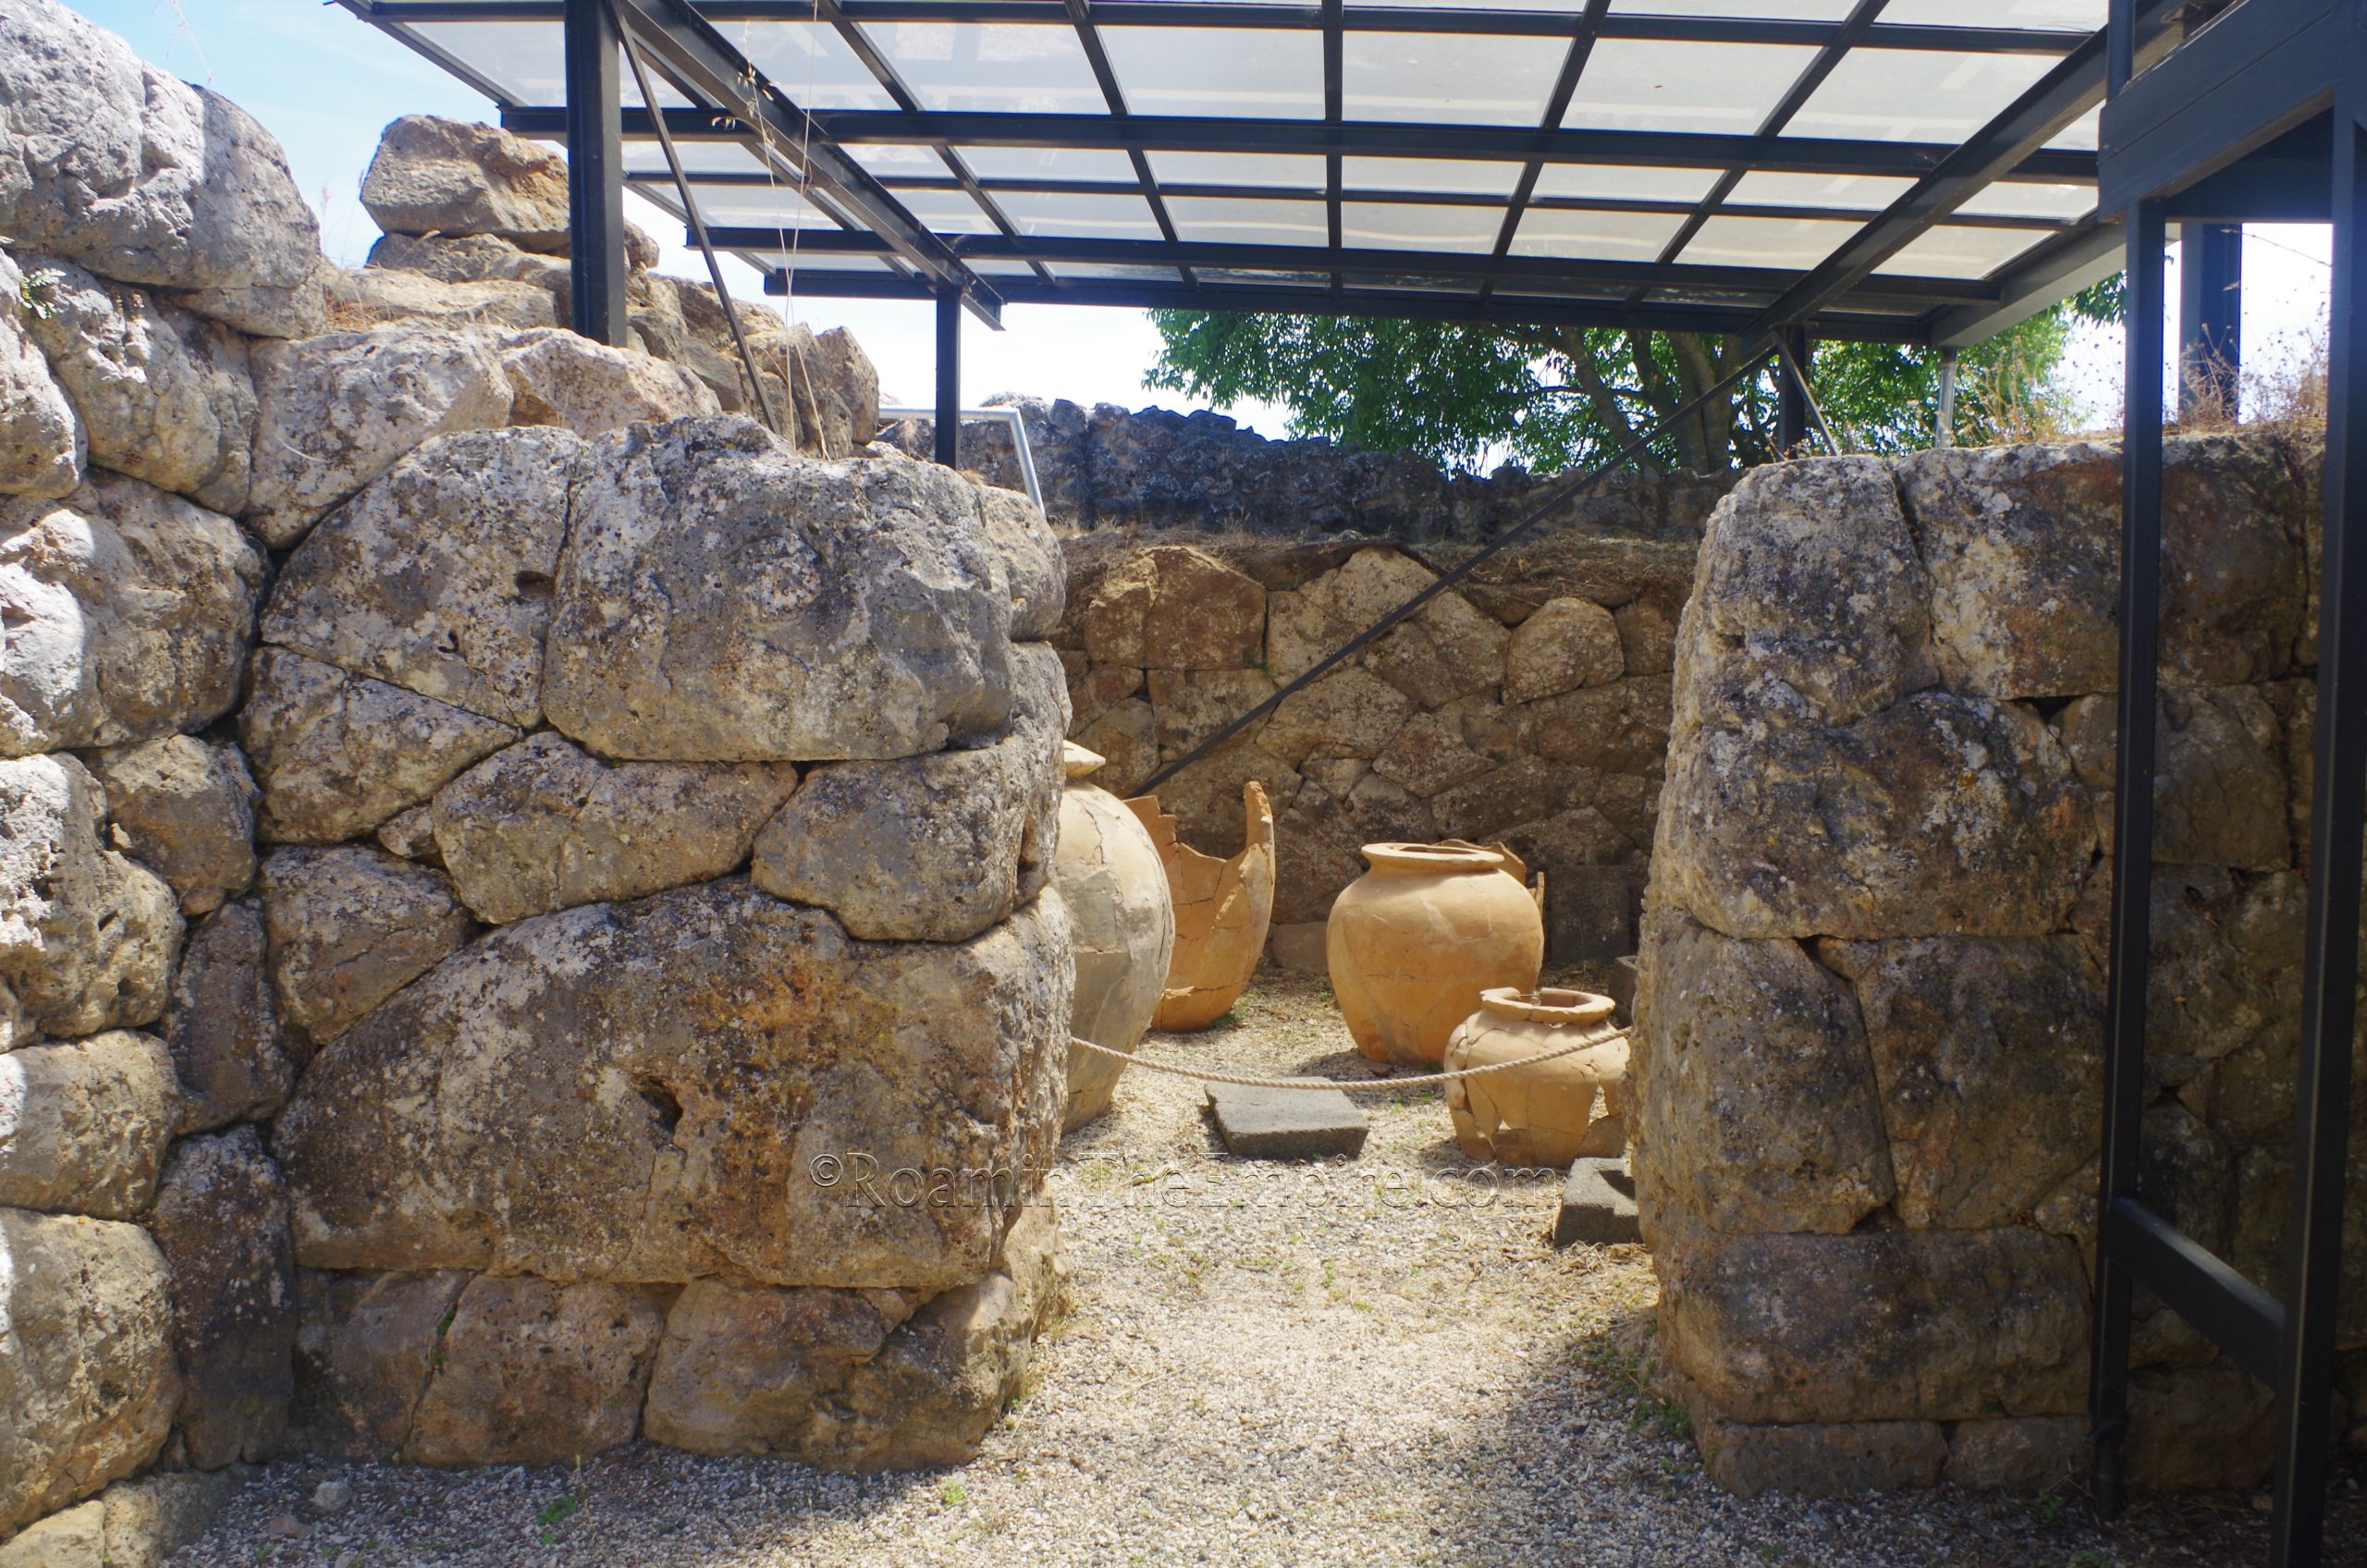 Storage room in the main area of the Necromanteion.